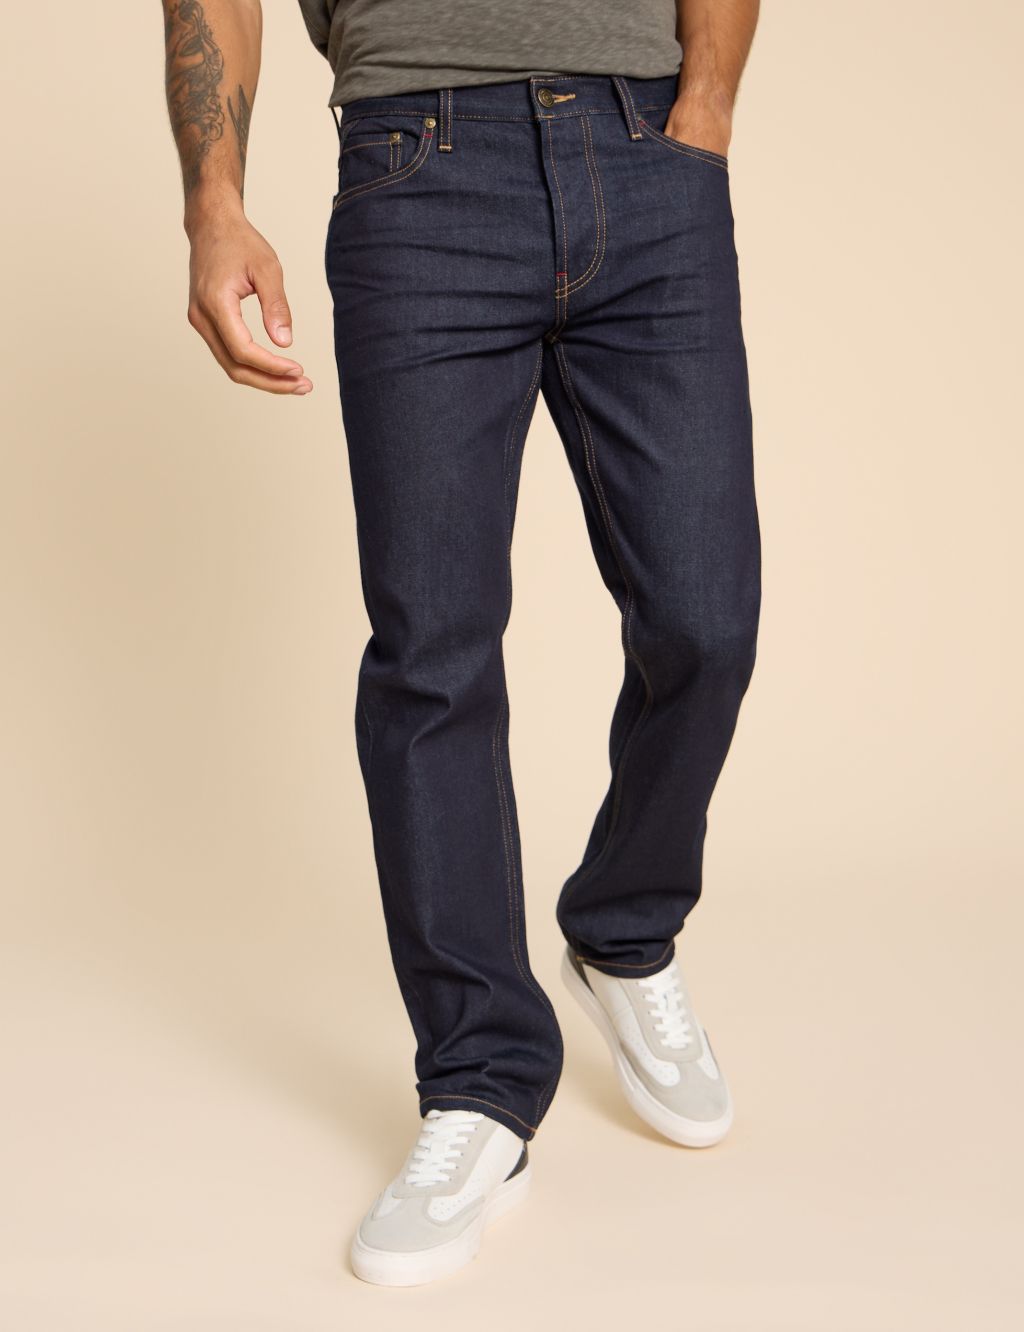 Straight Fit 5 Pocket Jeans image 3